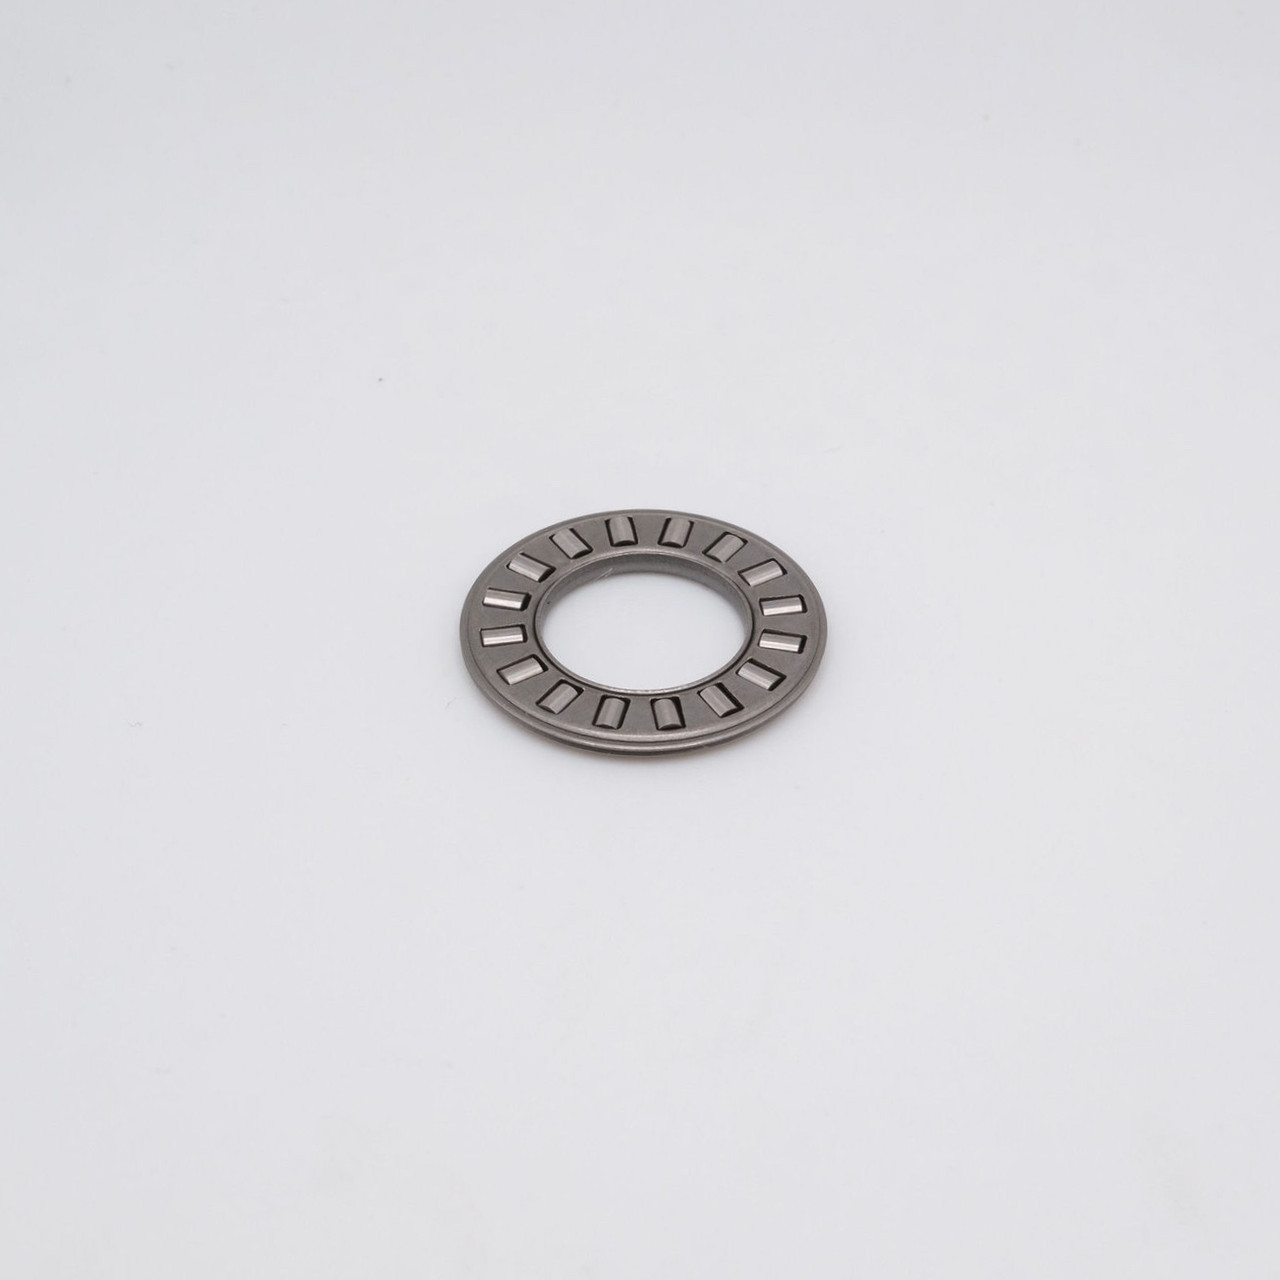 NTA-2435 Thrust Caged Needle Roller Bearing 1-1/2x2-3/16x1/16" Flat Top View